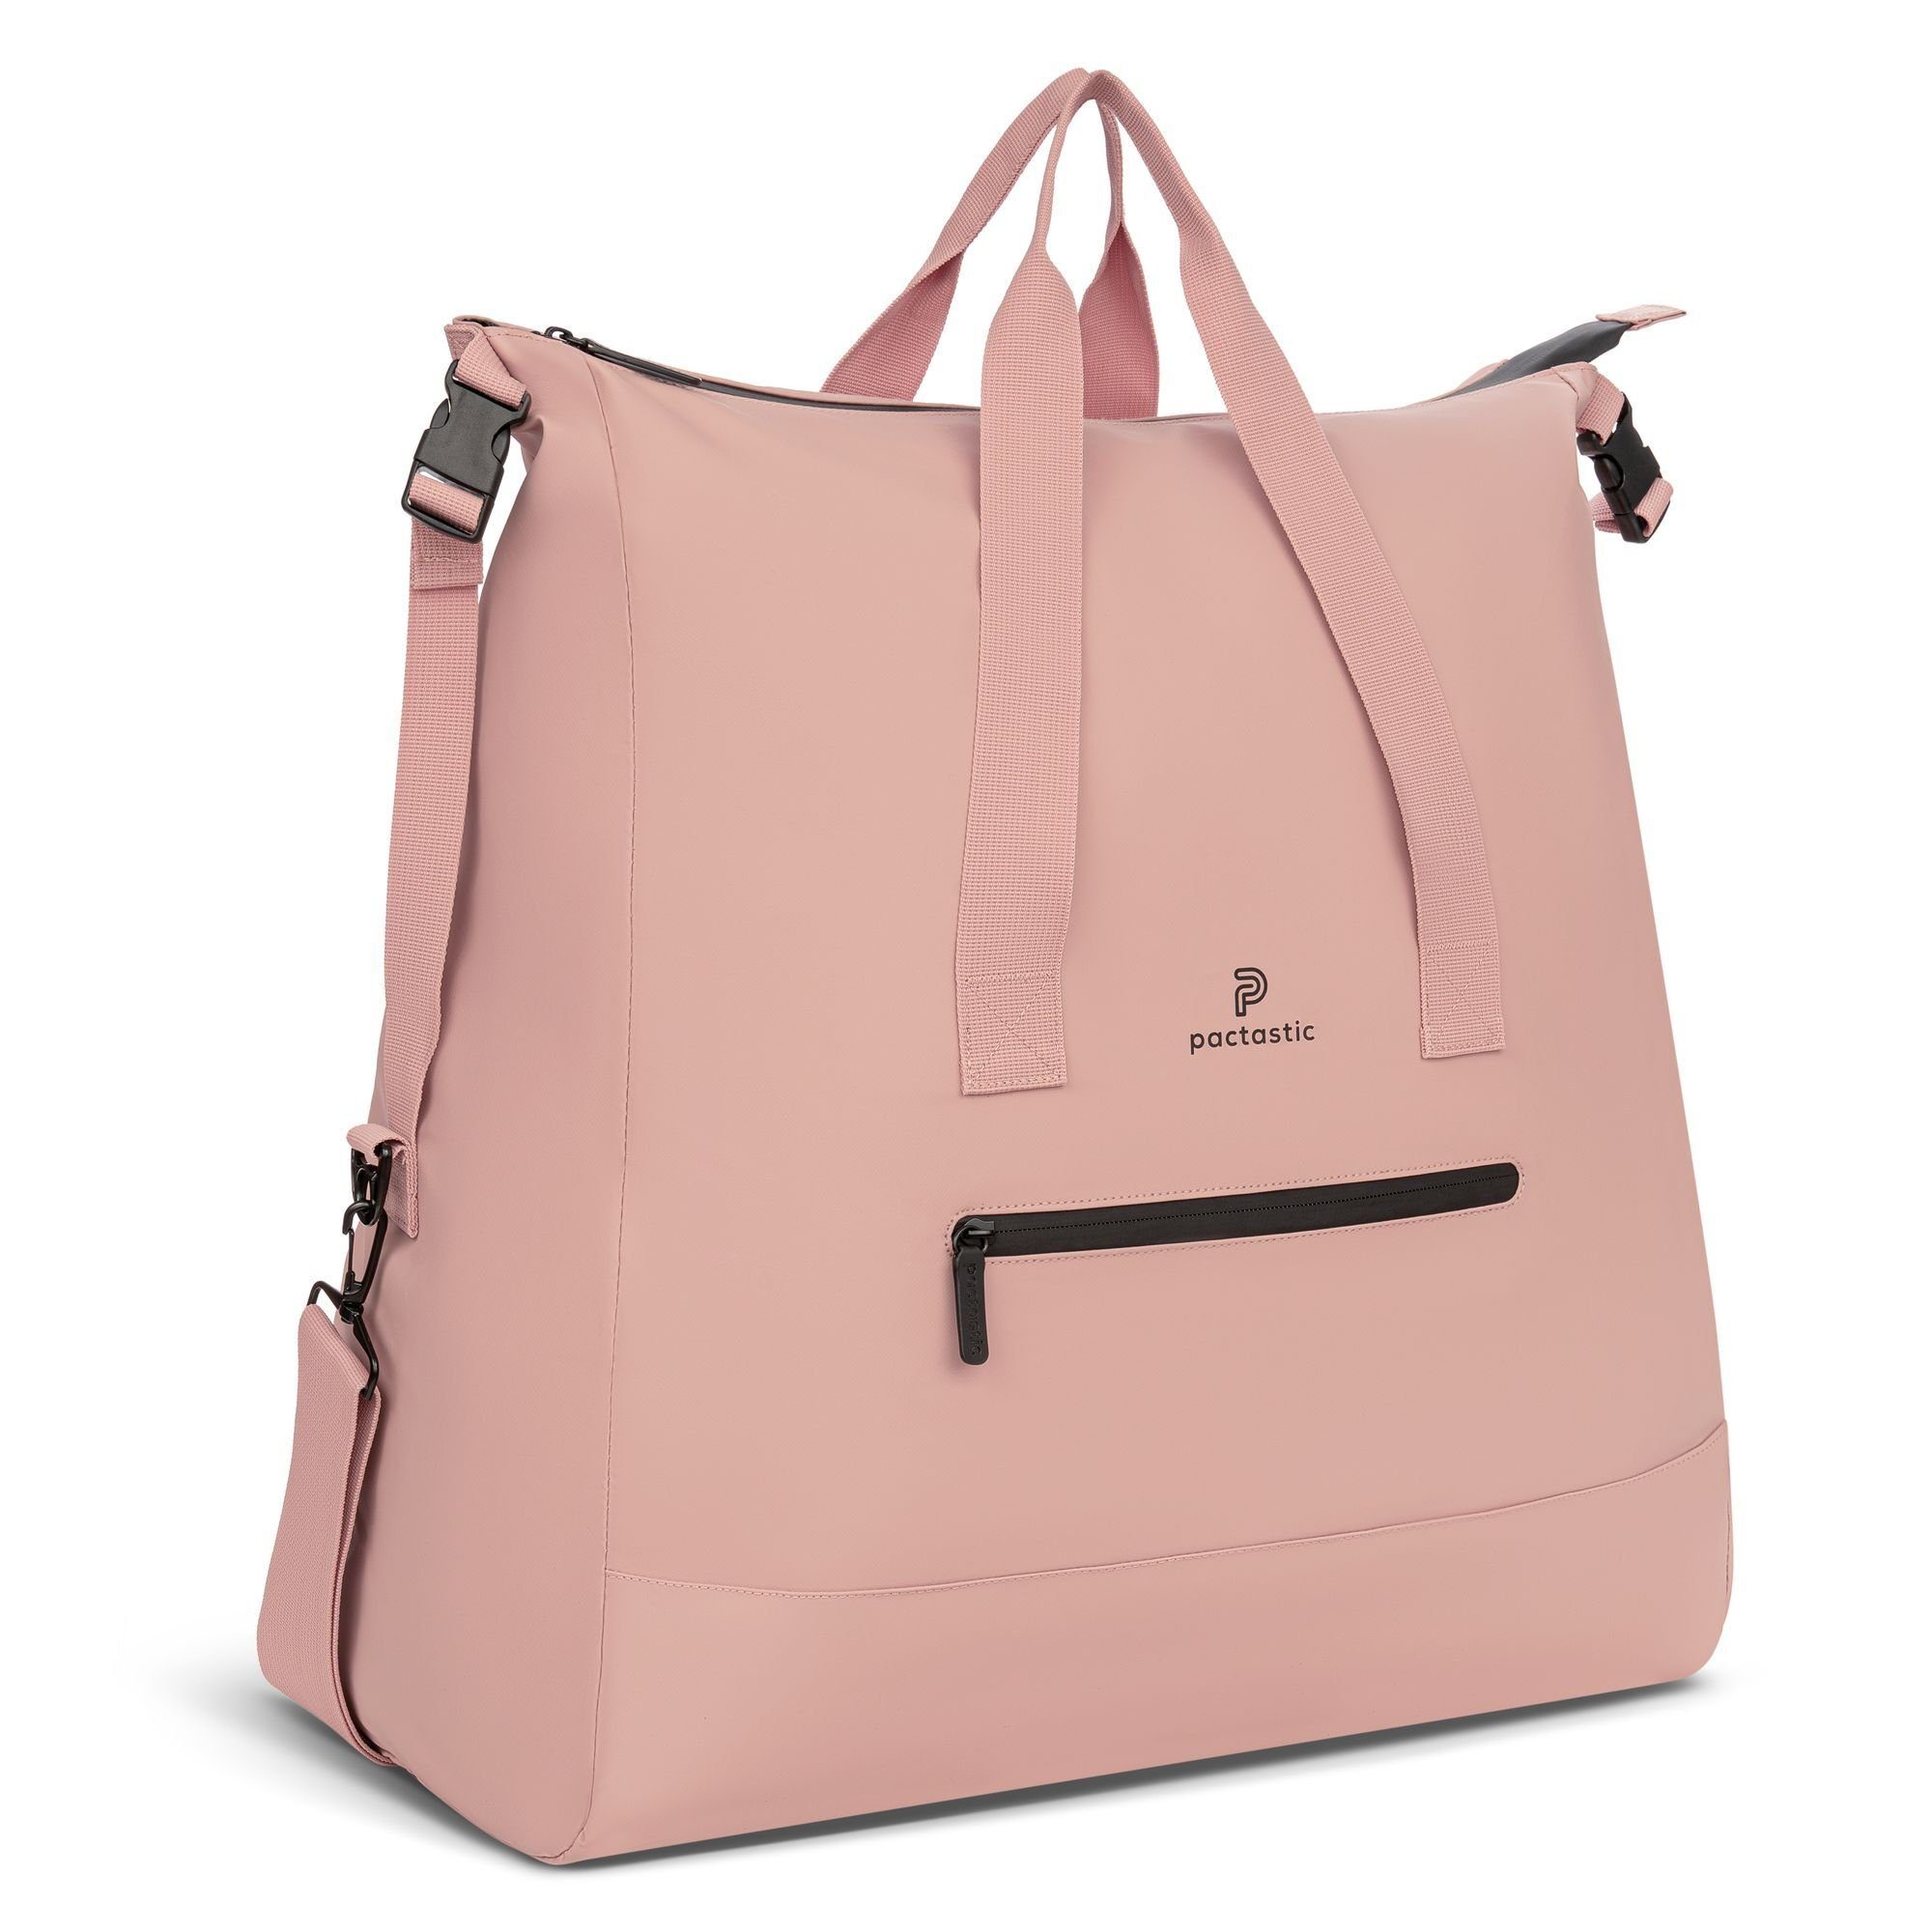 Pactastic Weekender Veganes Tech-Material Urban Collection, rose